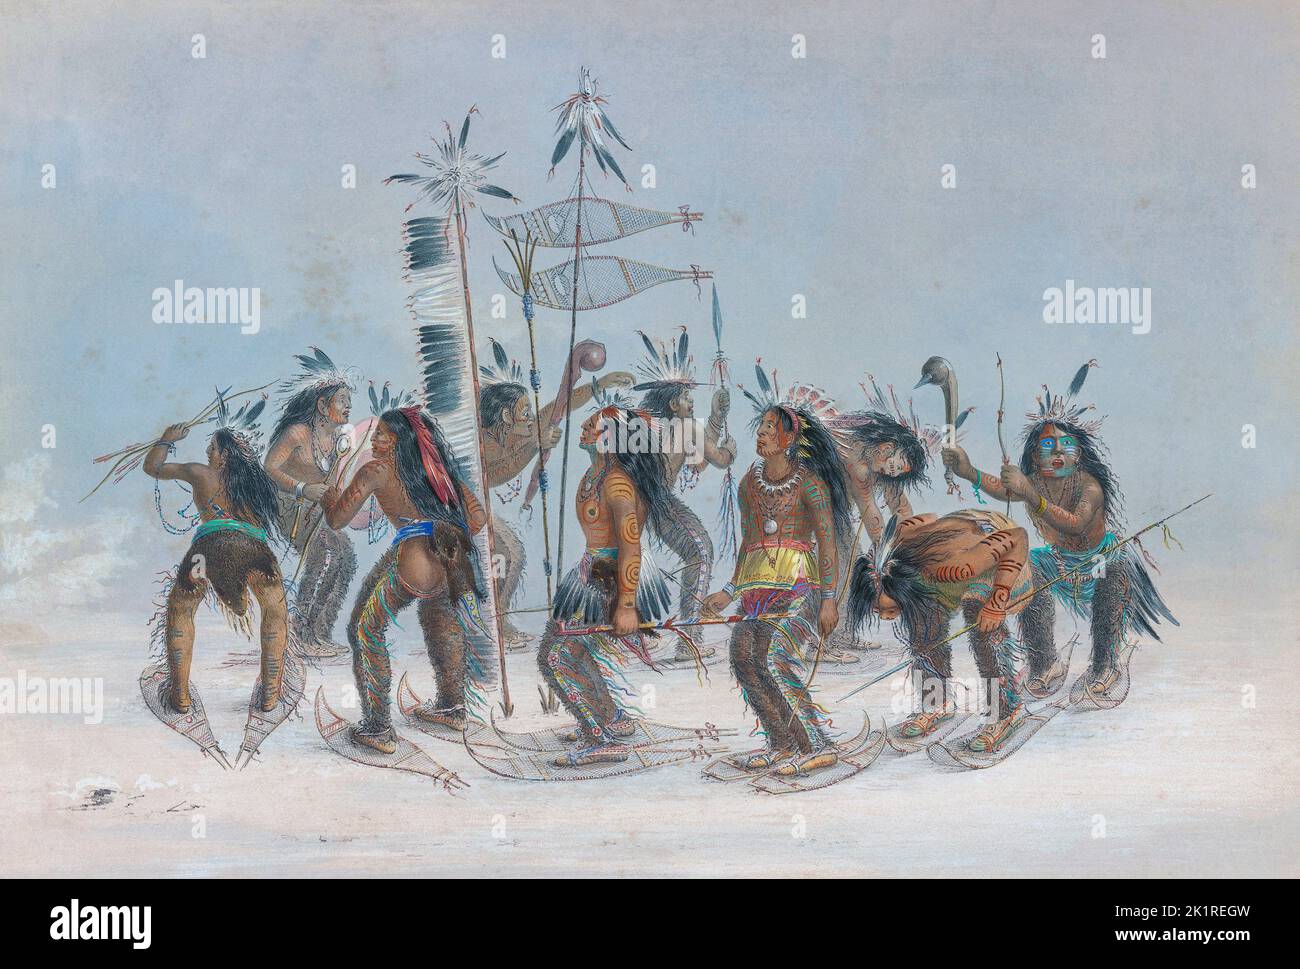 The Snow Shoe Dance. An annual dance performed after the fall of the first snow.  From Catlin's North American Indian Portfolio, published in London 1844 by the artist, American adventurer George Catlin, 1796 - 1872.  During many journeys Catlin recorded with pen and brush the customs and life-styles of Native American tribes. Stock Photo